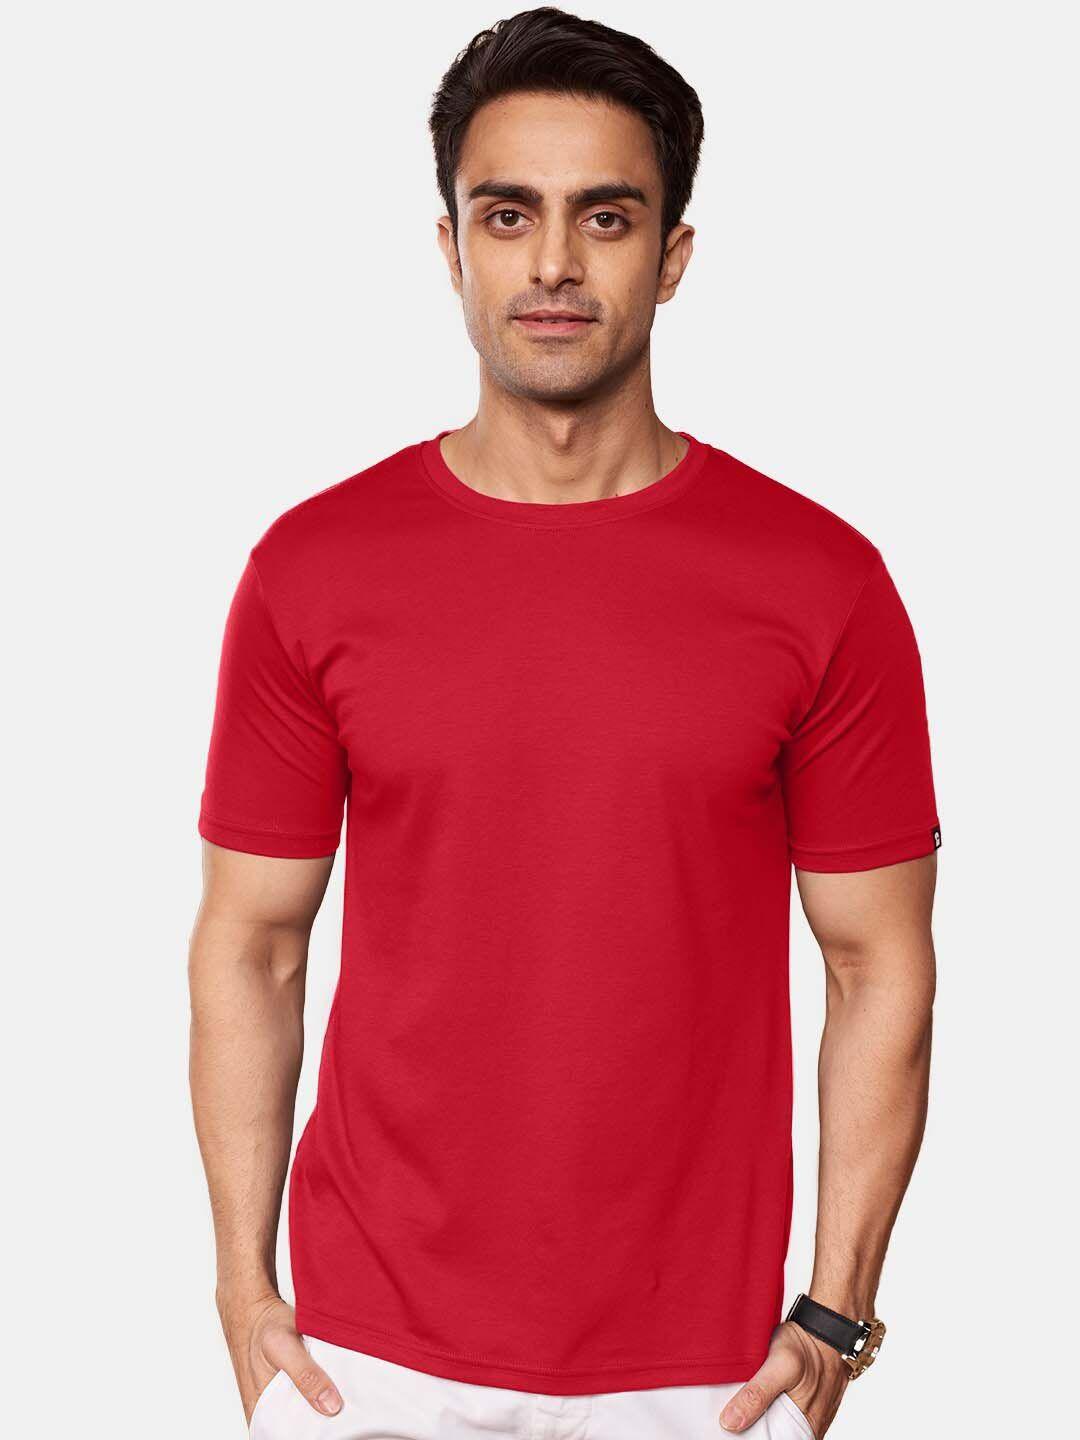 the-souled-store-men-round-neck-cotton-t-shirt